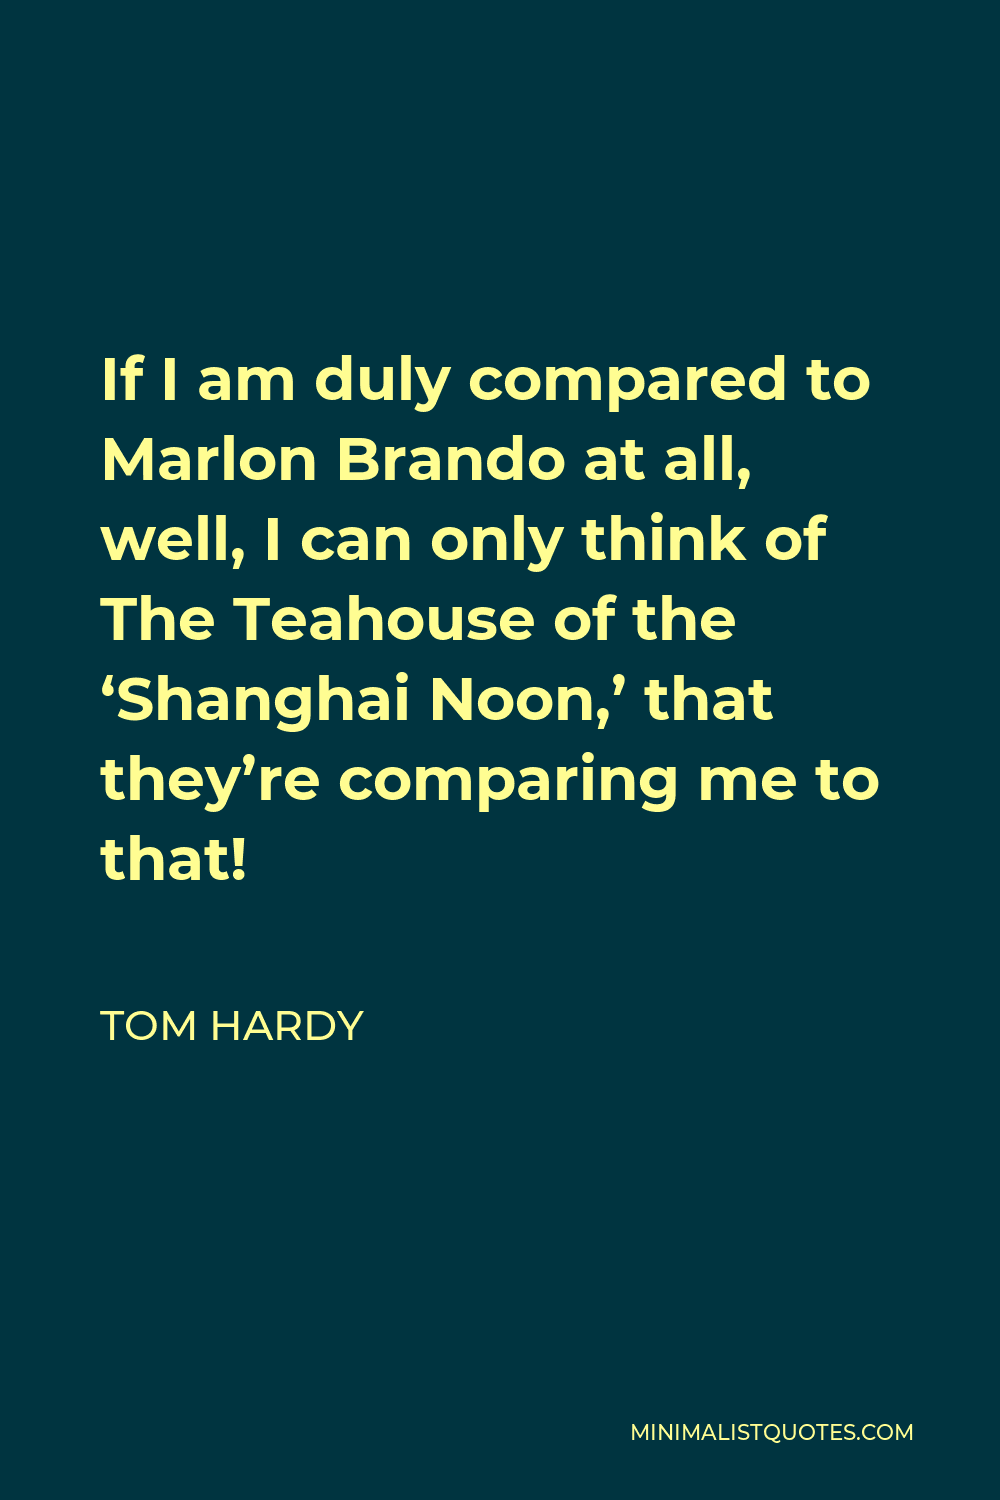 Tom Hardy Quote - If I am duly compared to Marlon Brando at all, well, I can only think of The Teahouse of the ‘Shanghai Noon,’ that they’re comparing me to that!